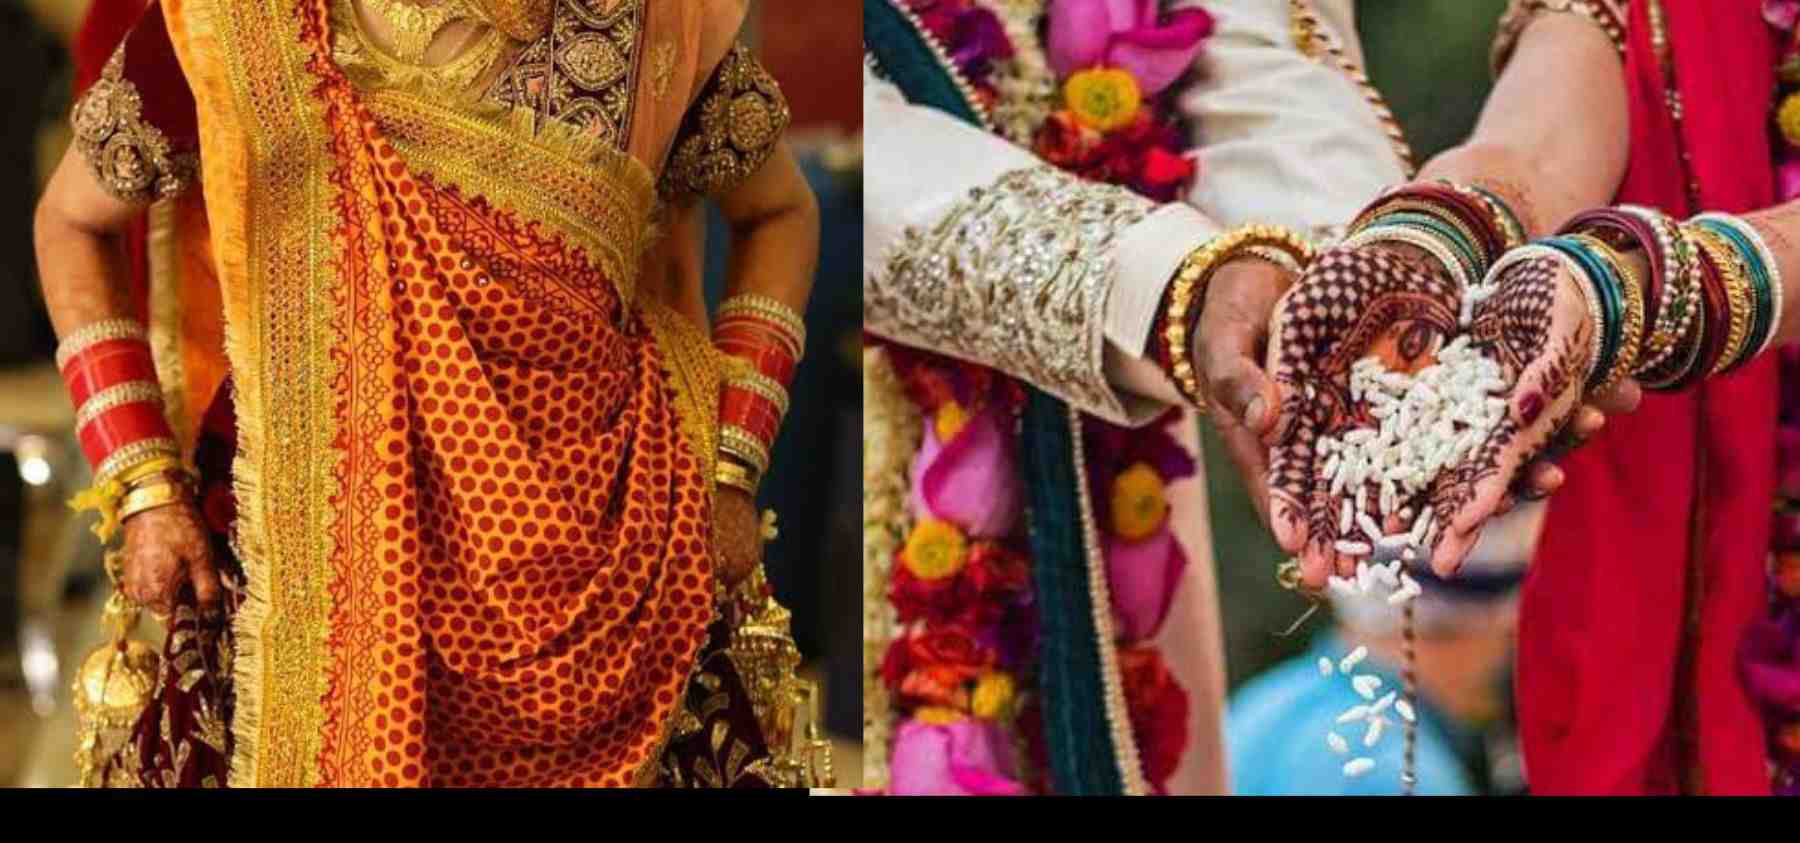 Uttarakhand news: Boys of Pithoragarh district are not getting kumaoni girls for marriage, going to Nepal. kumaoni girl for marriage